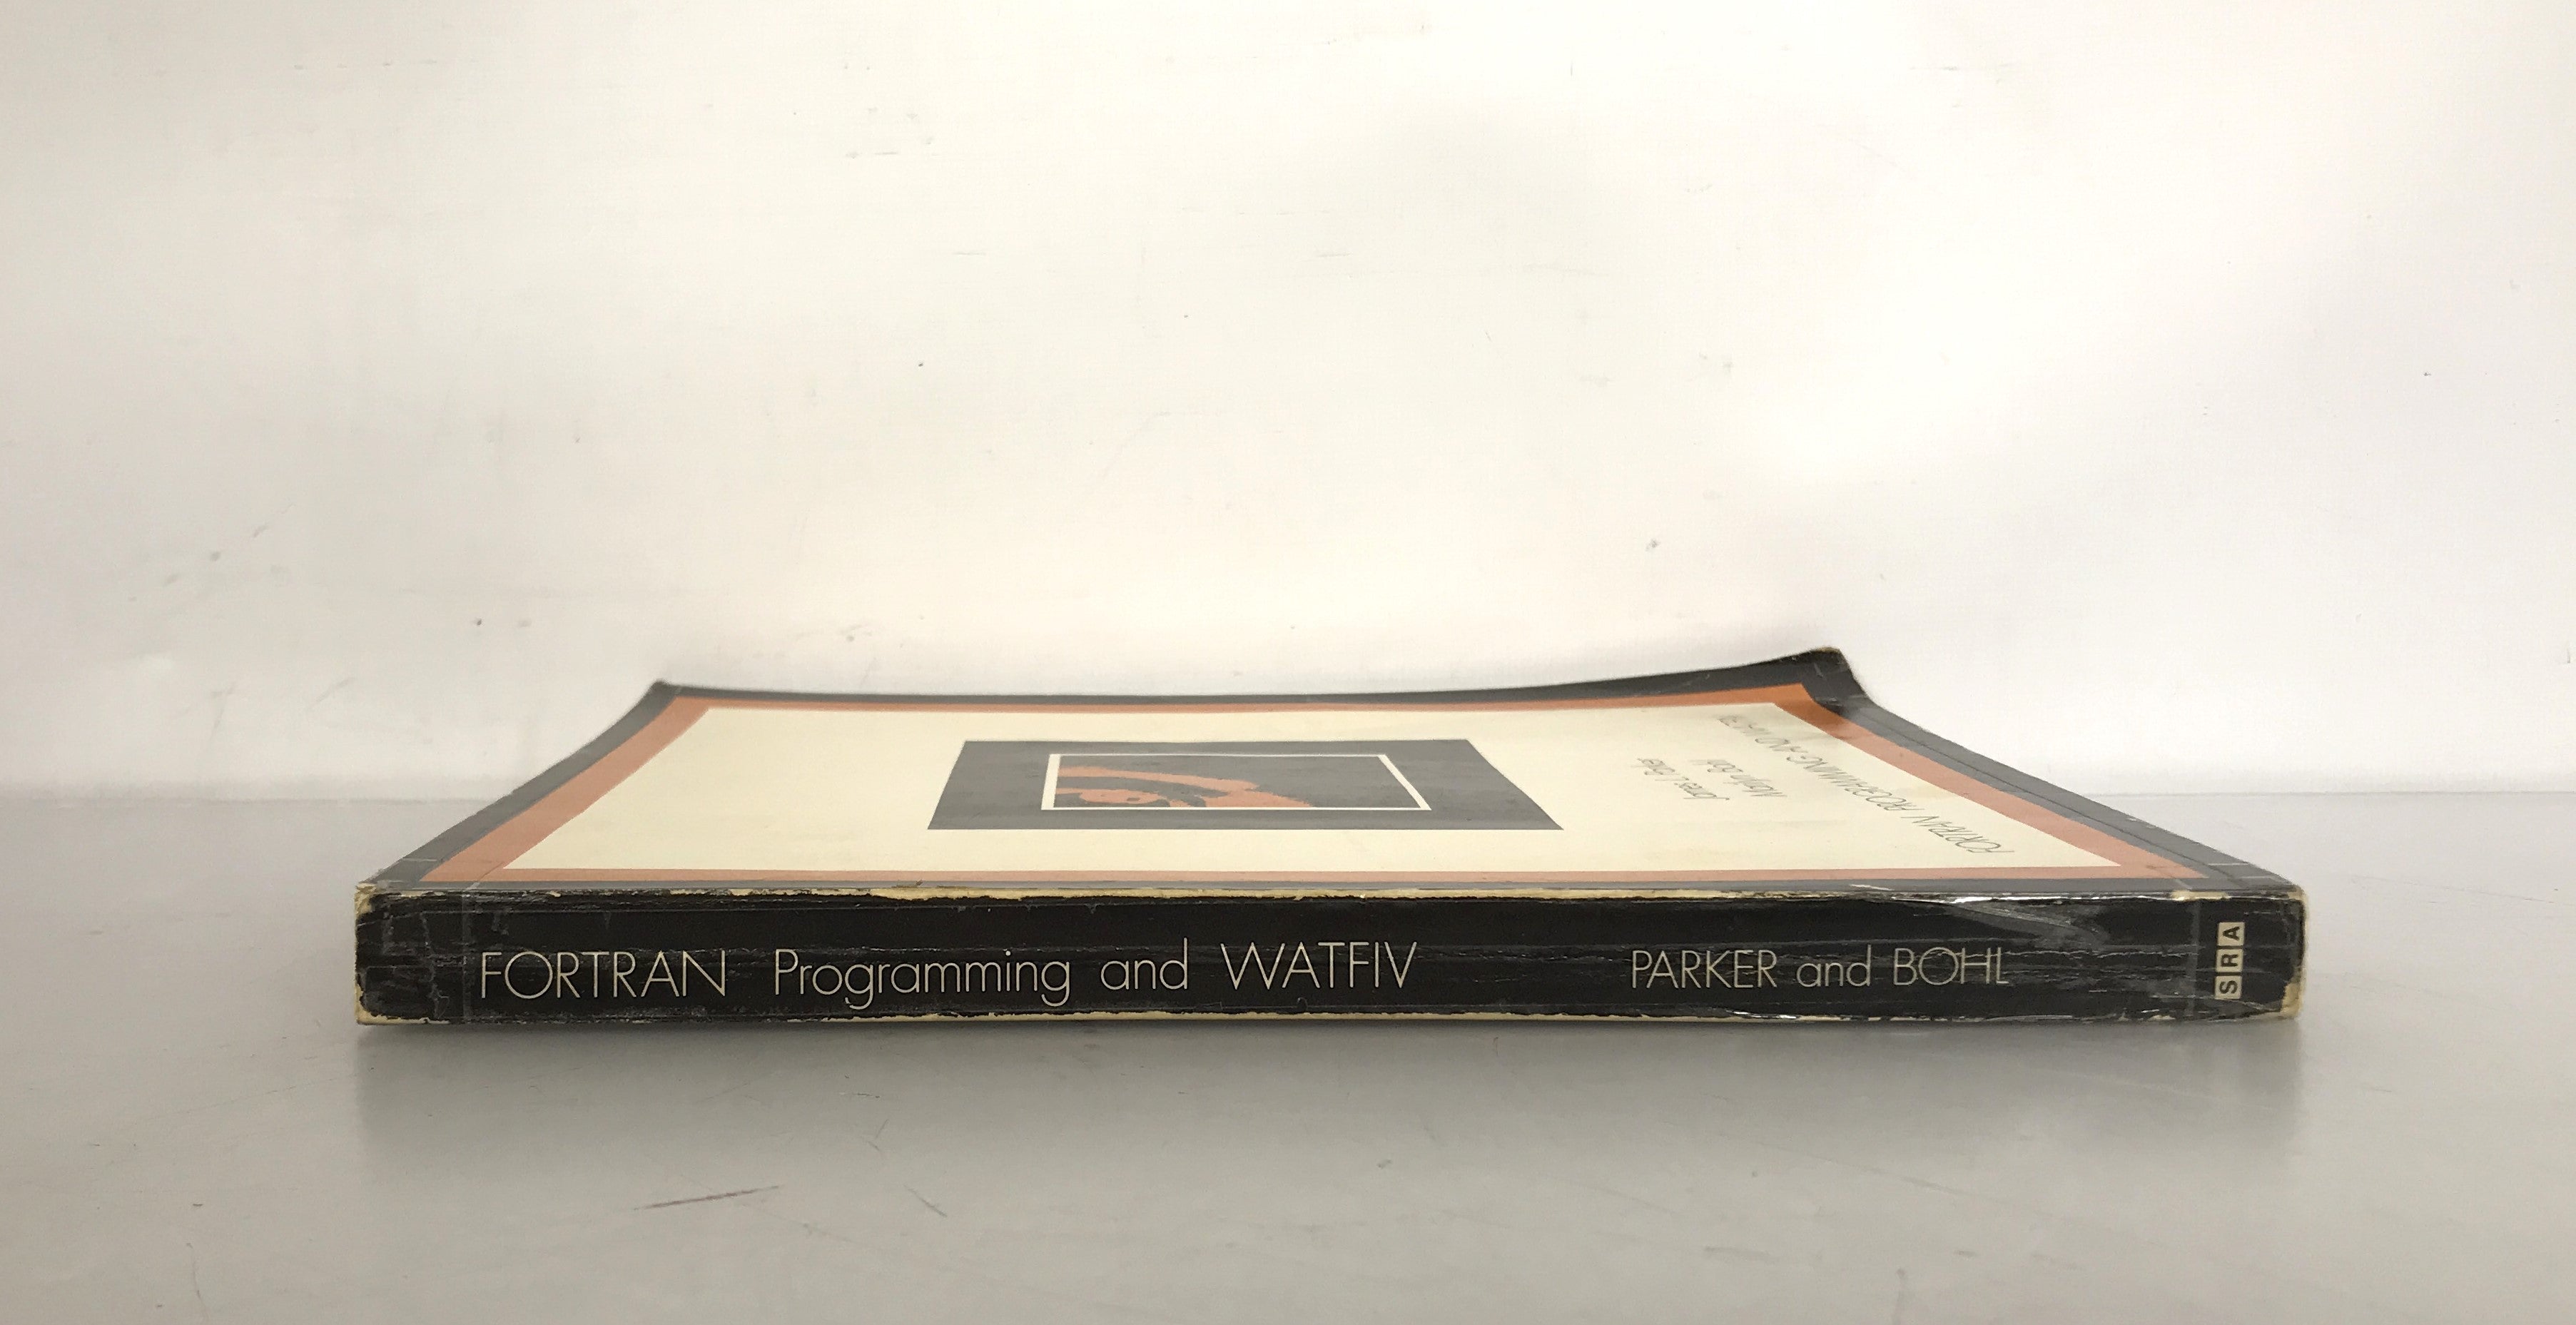 Fortran Programming and WATFIV by Parker and Bohl 1973 SC